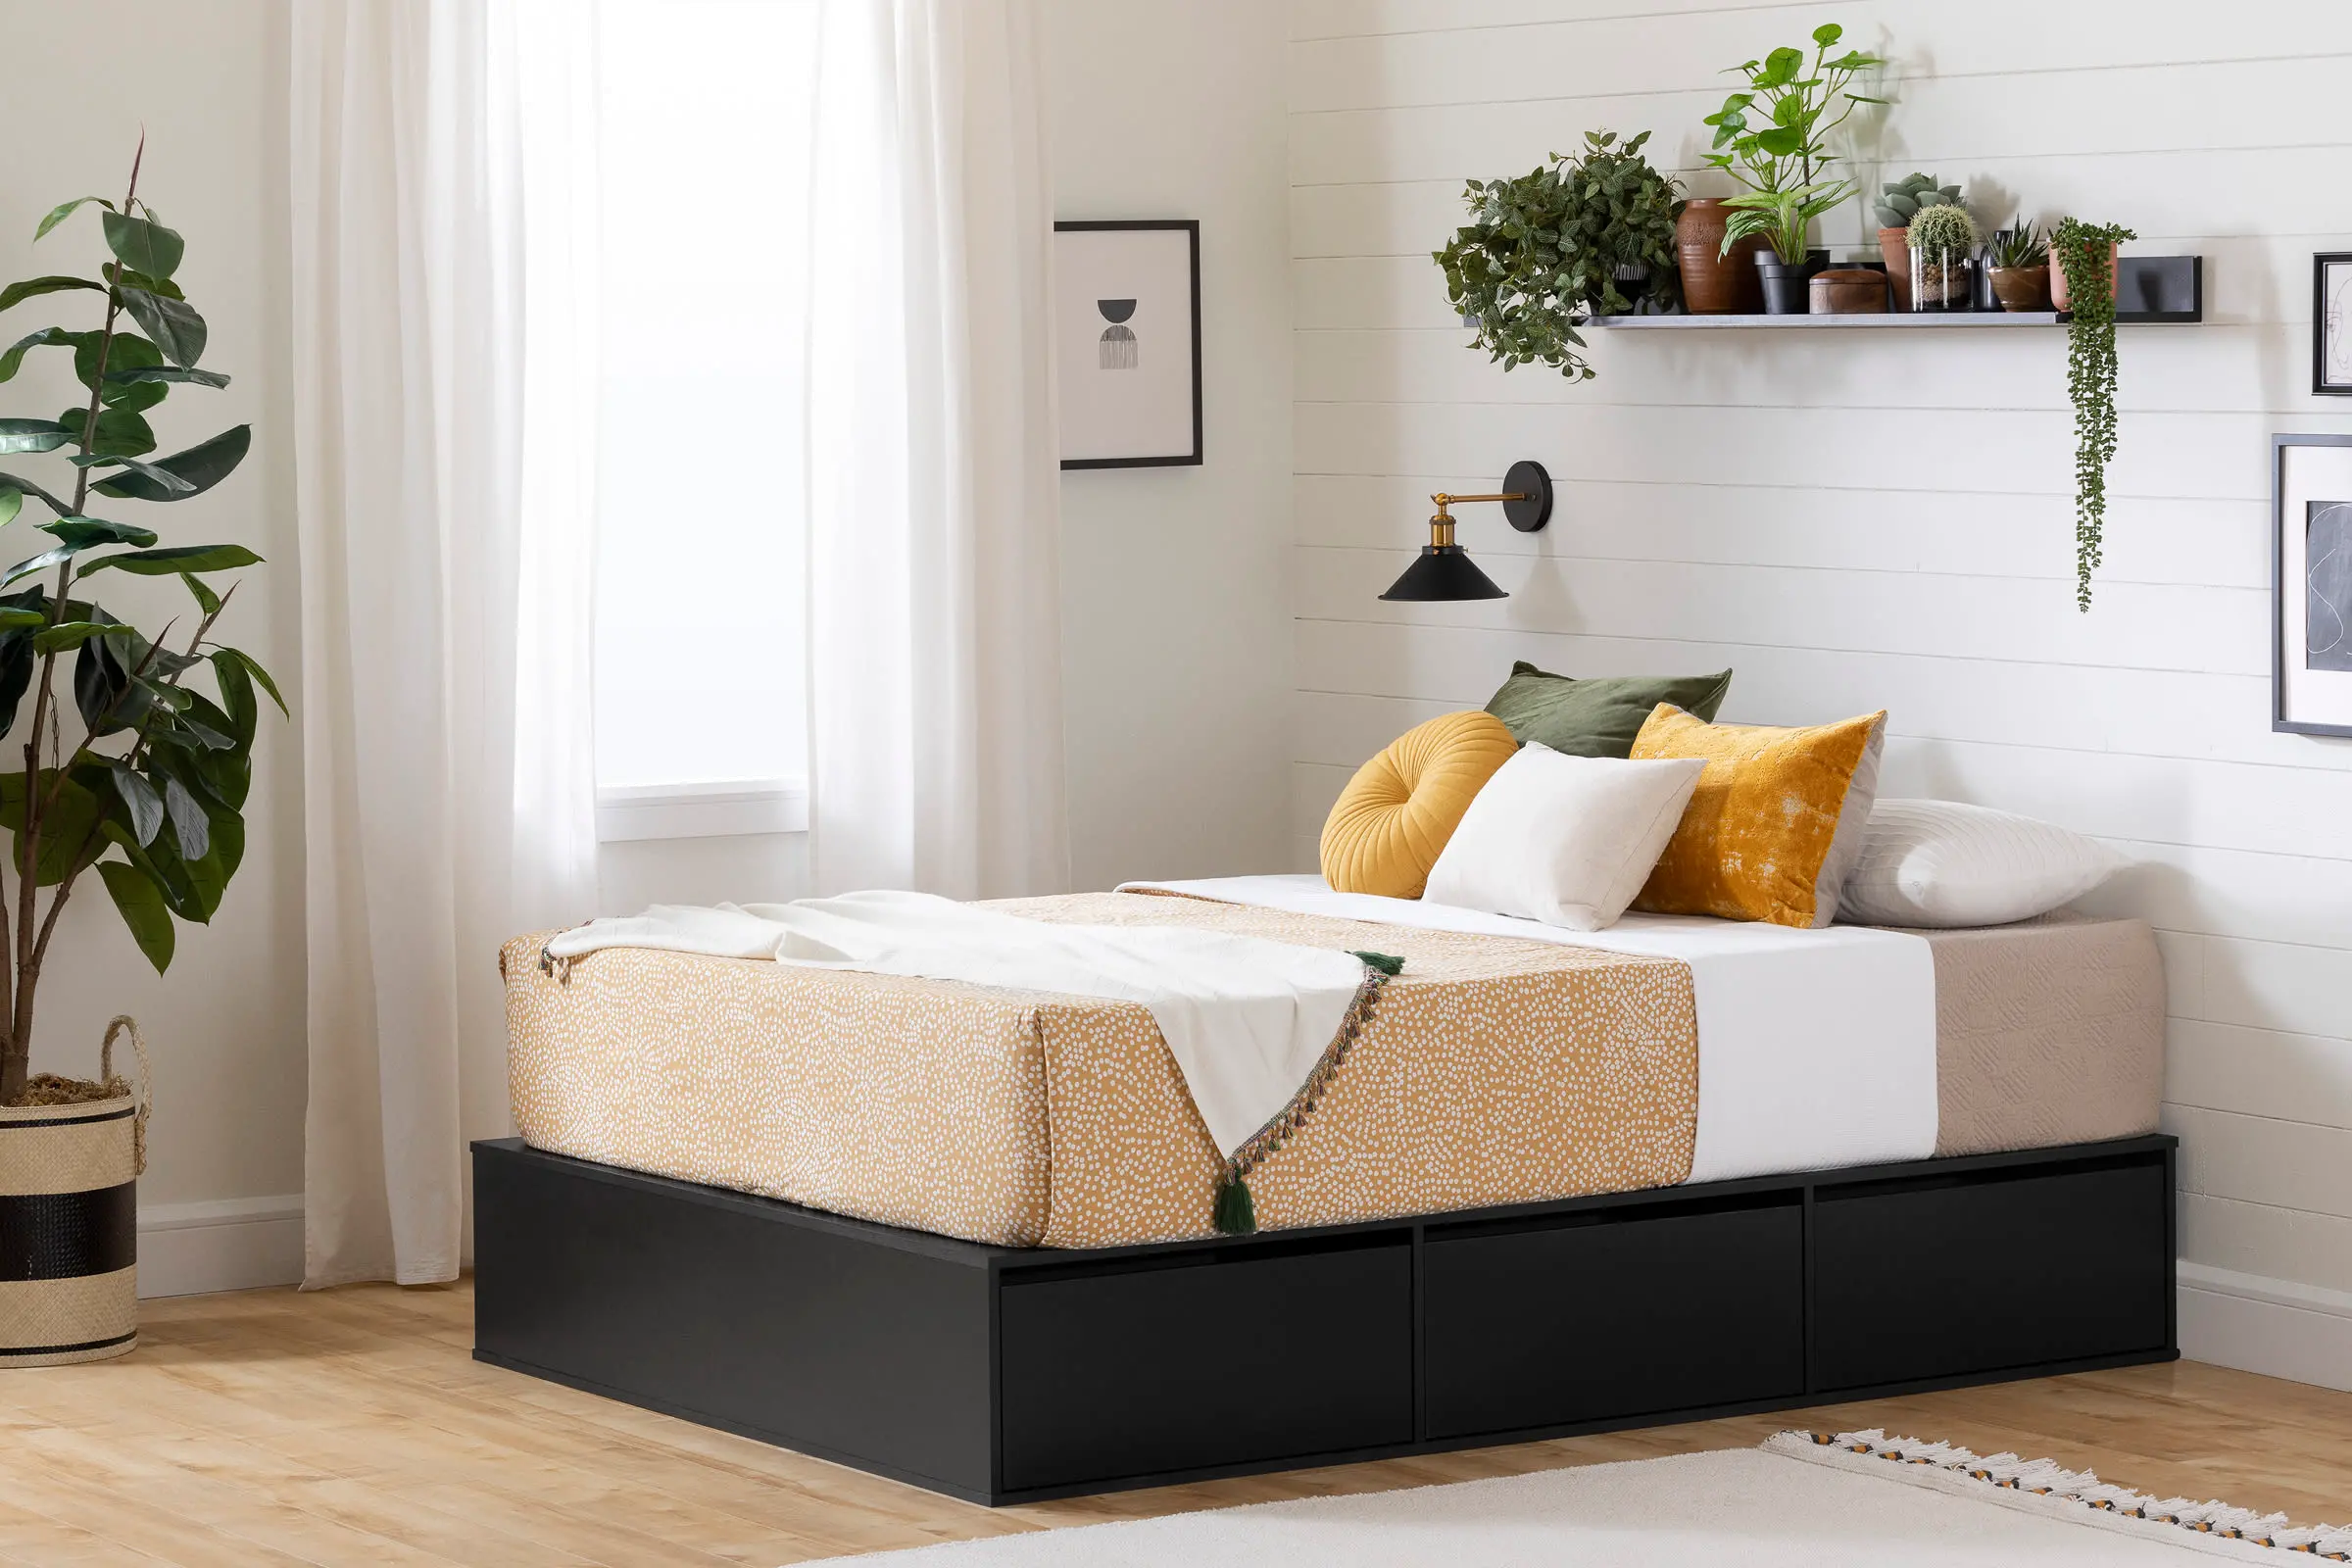 13254 Fusion Black Queen Platform Bed with Six Drawers f sku 13254